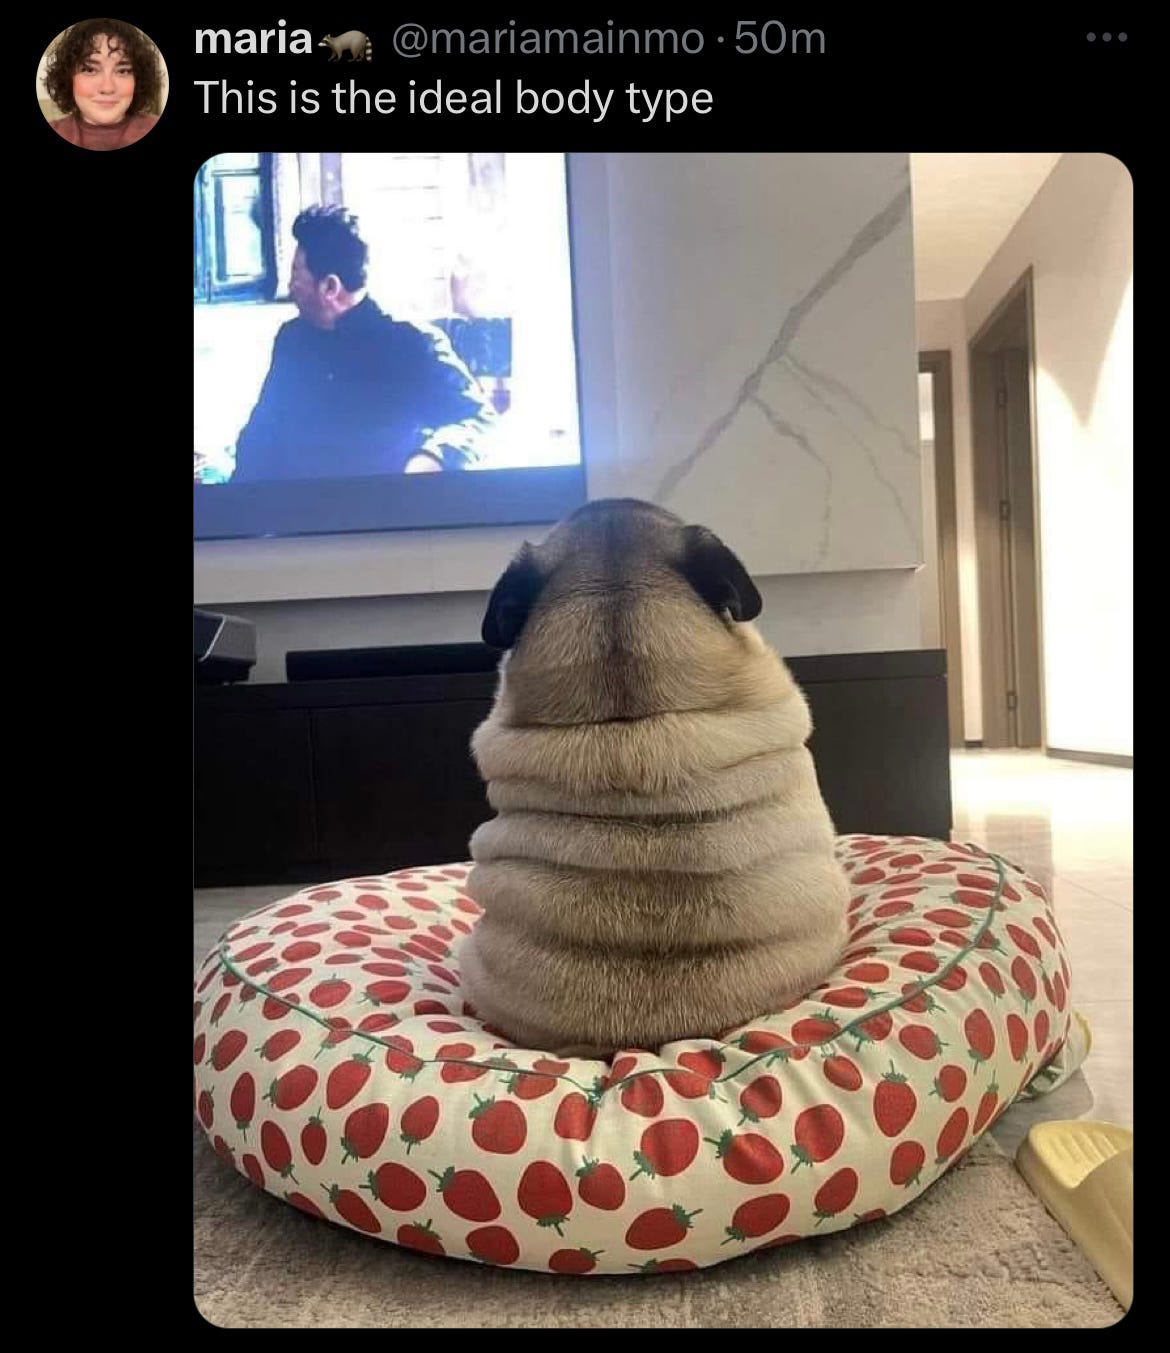 Tweet from @mariamainmo that says "This is the ideal body type" and shows a picture of a pug seated on a pillow covered in strawberries. The pug is upright and his entire back is just rolls on rolls.